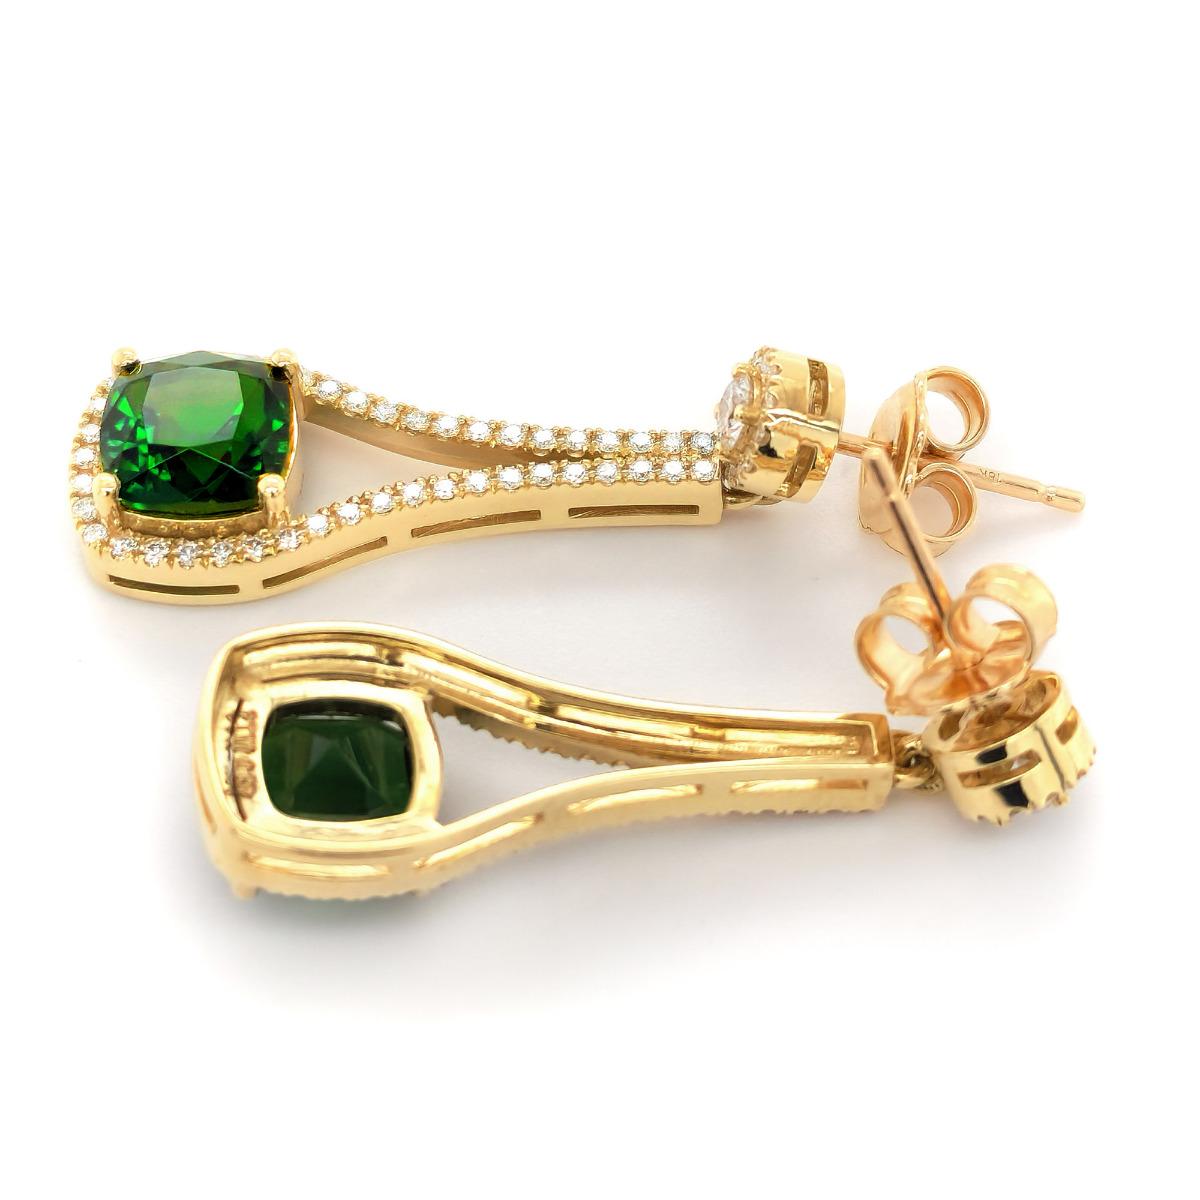 Mixed Cut Natural Tourmalines 4.57 Carats set in 18K Yellow Gold Earrings with Diamonds